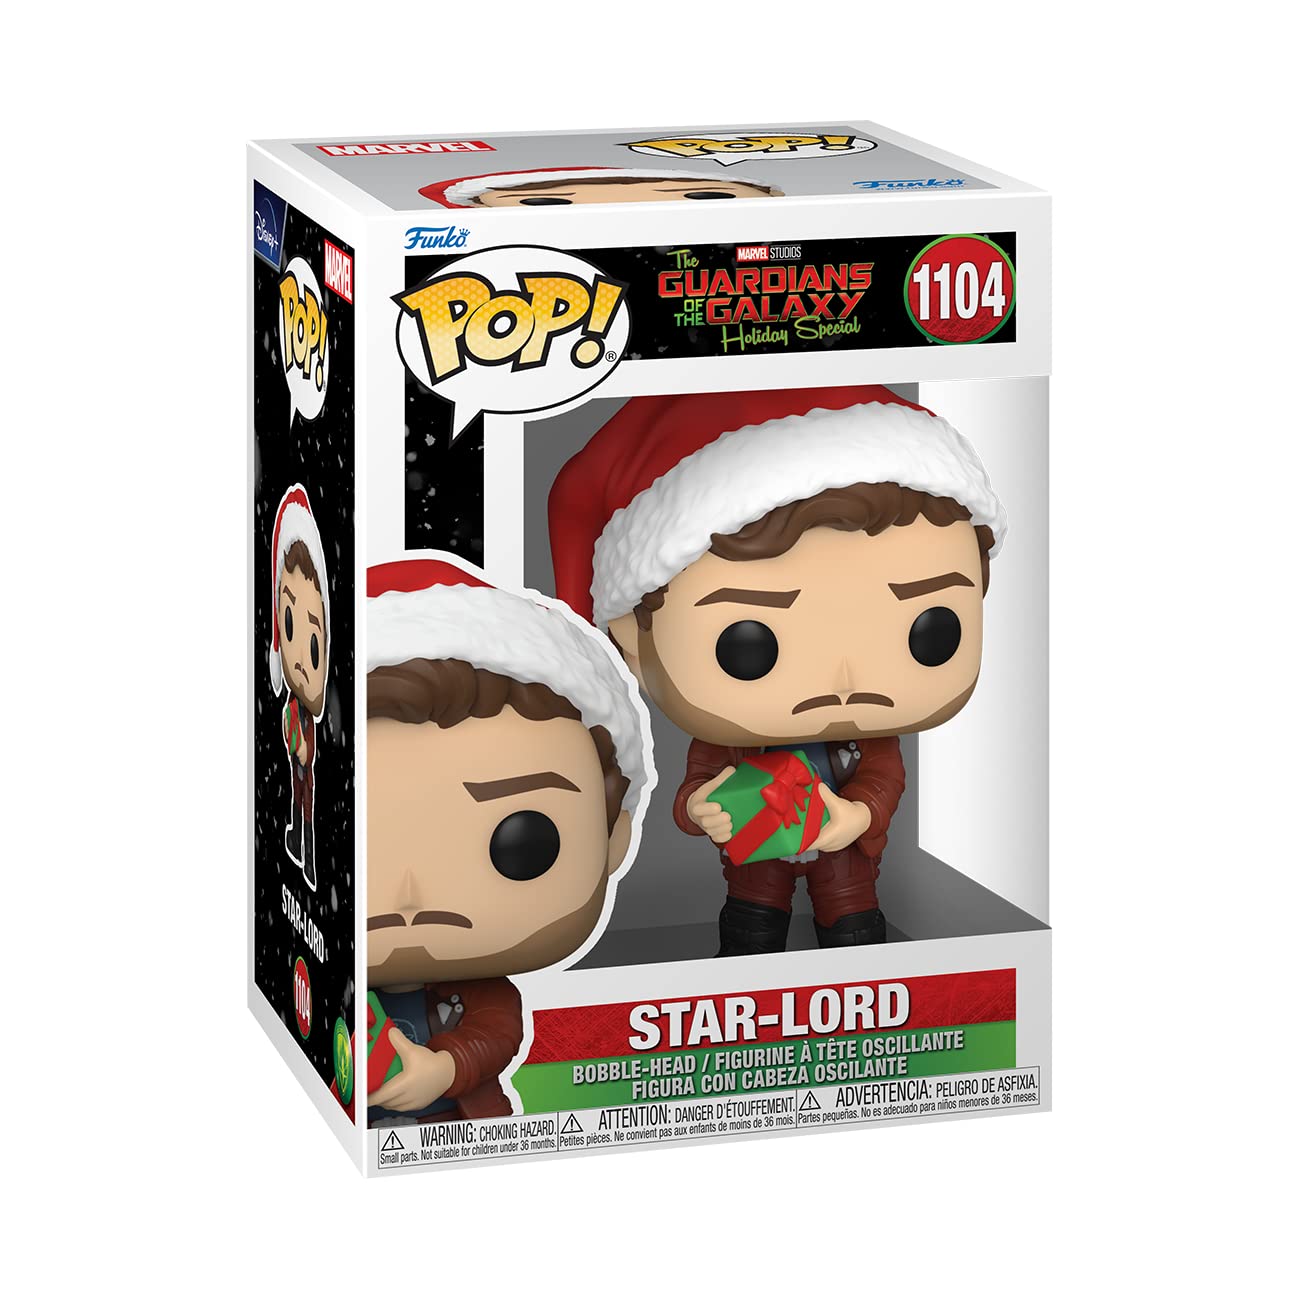 Marvel - The Guardians of the Galaxy Holiday Special: Star-Lord Pop! Vinyl Figure (1104)